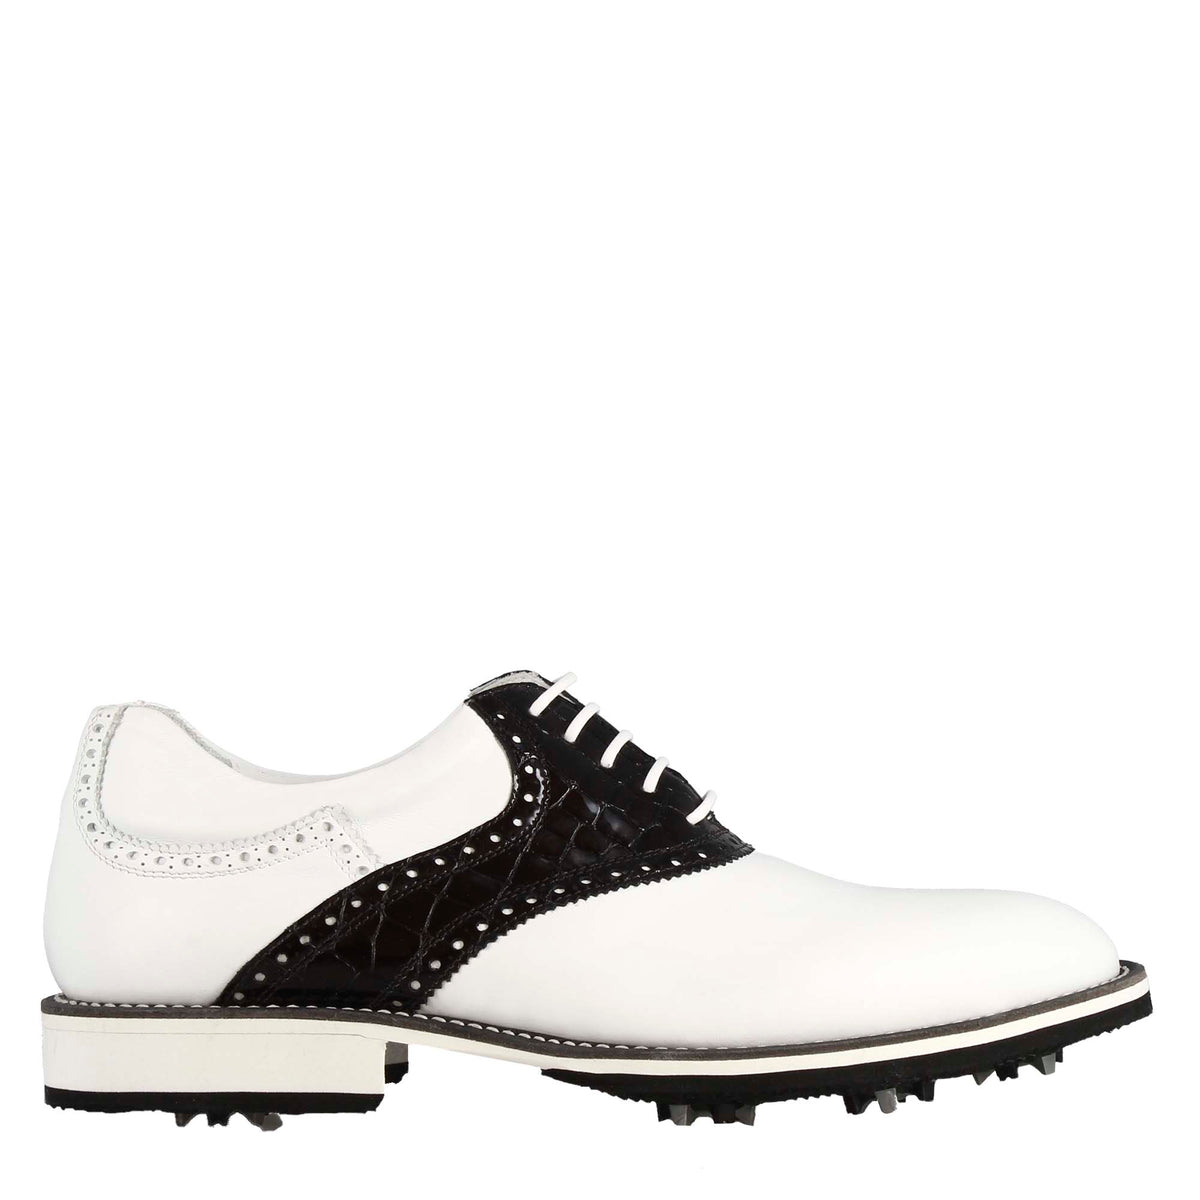 Handcrafted men's golf shoe in white leather with black leather details.